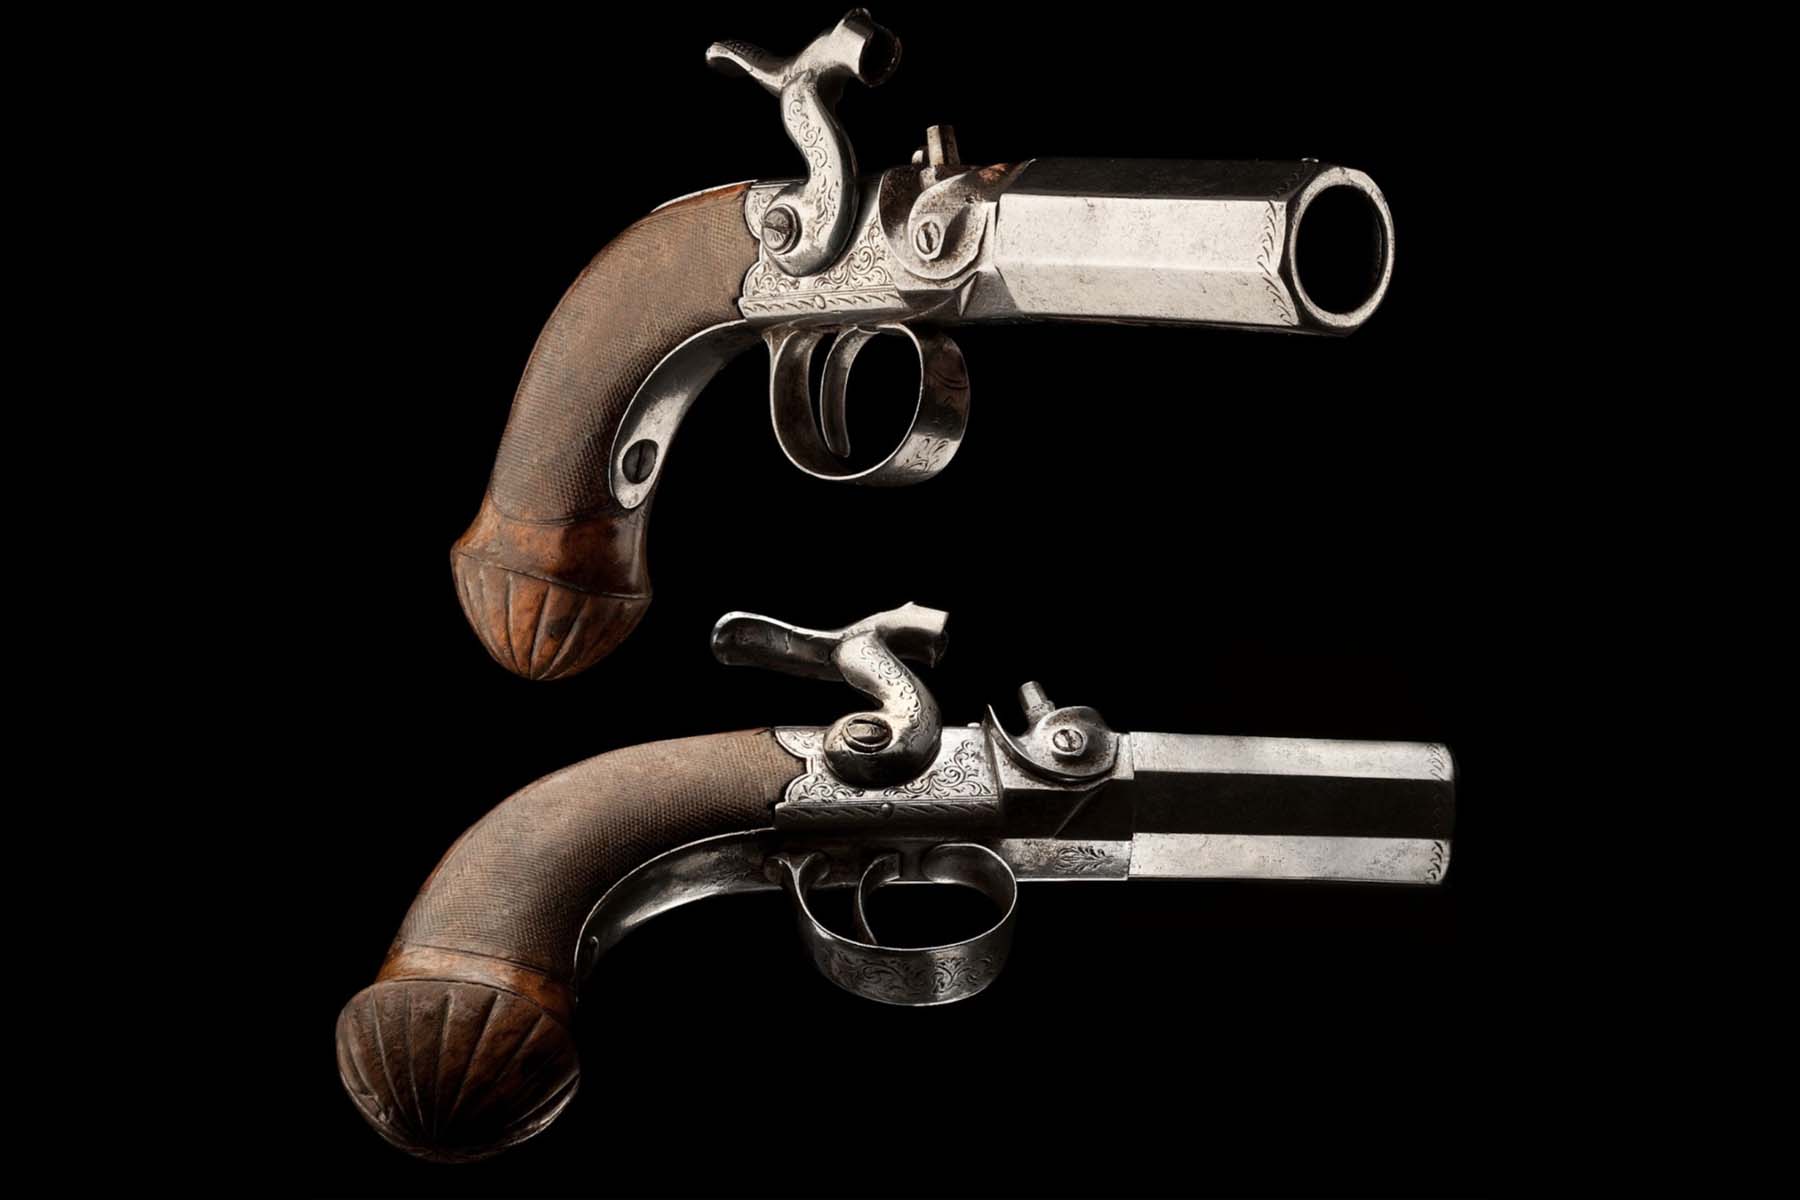 A close-up and artistic shot of two small capsule pistols placed atop each other against a black background.